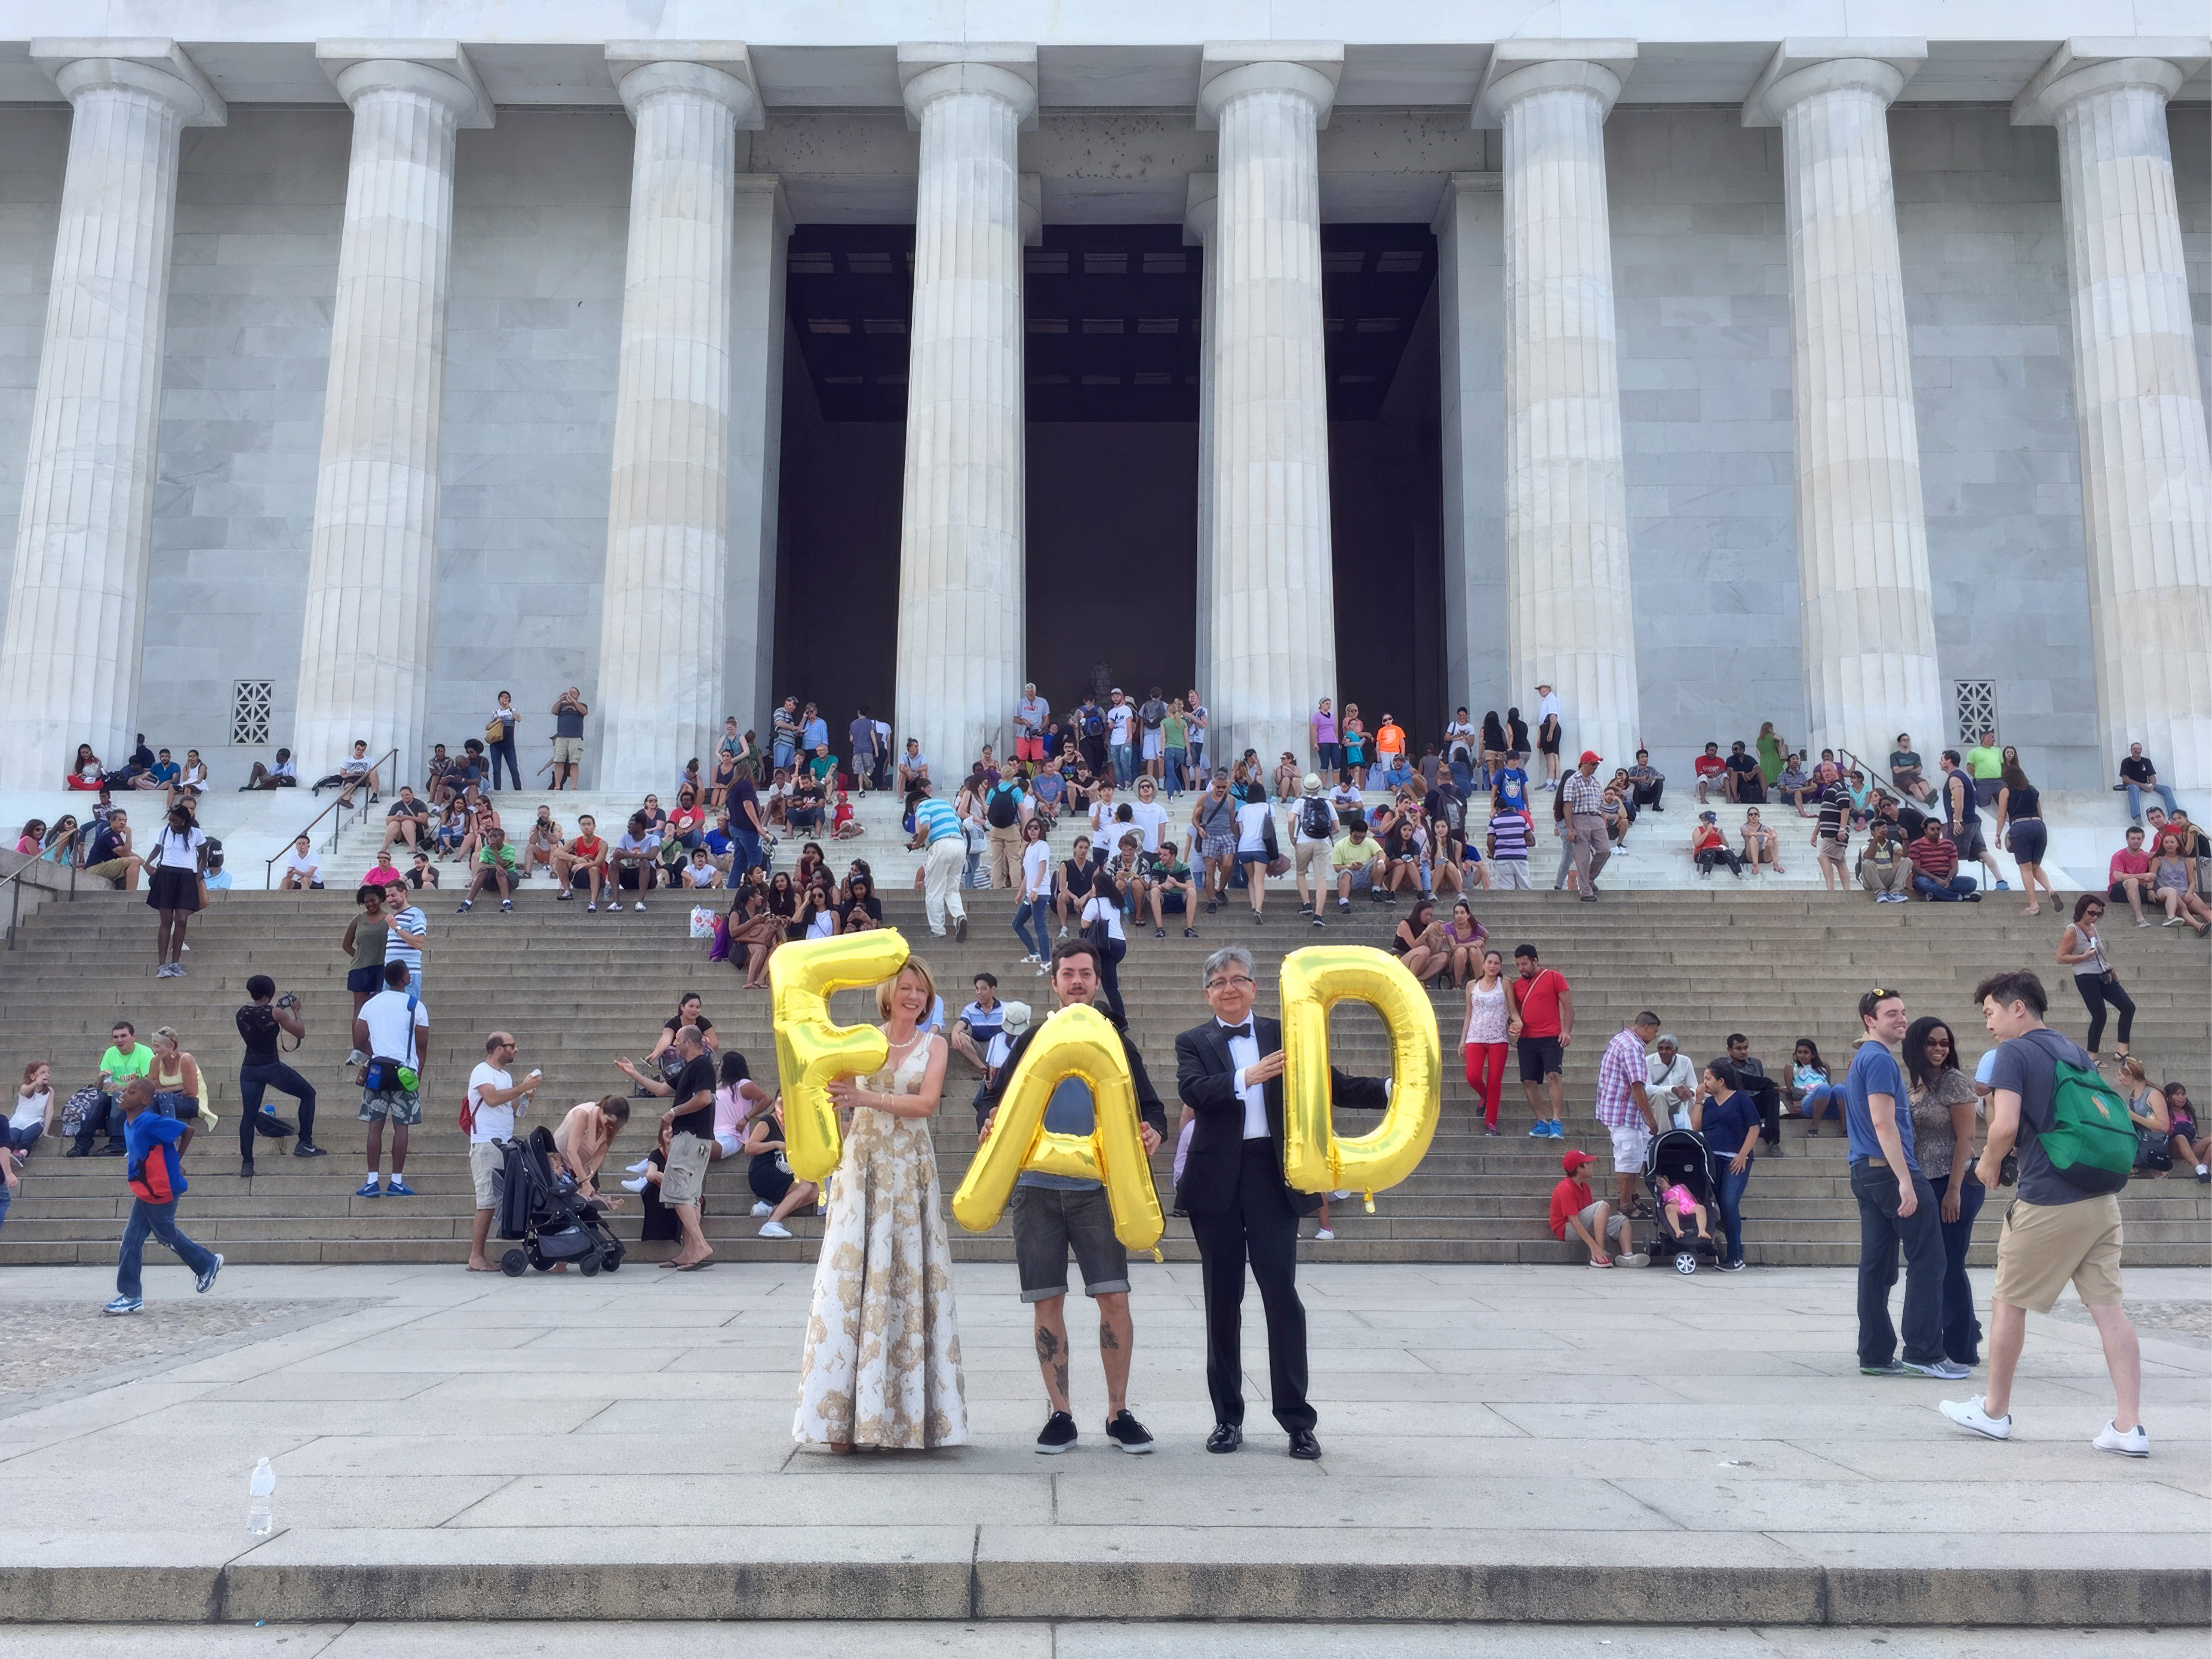 United States, Washington, D.C., Lincoln Memorial - Fad, Silence Was Golden, gold balloons